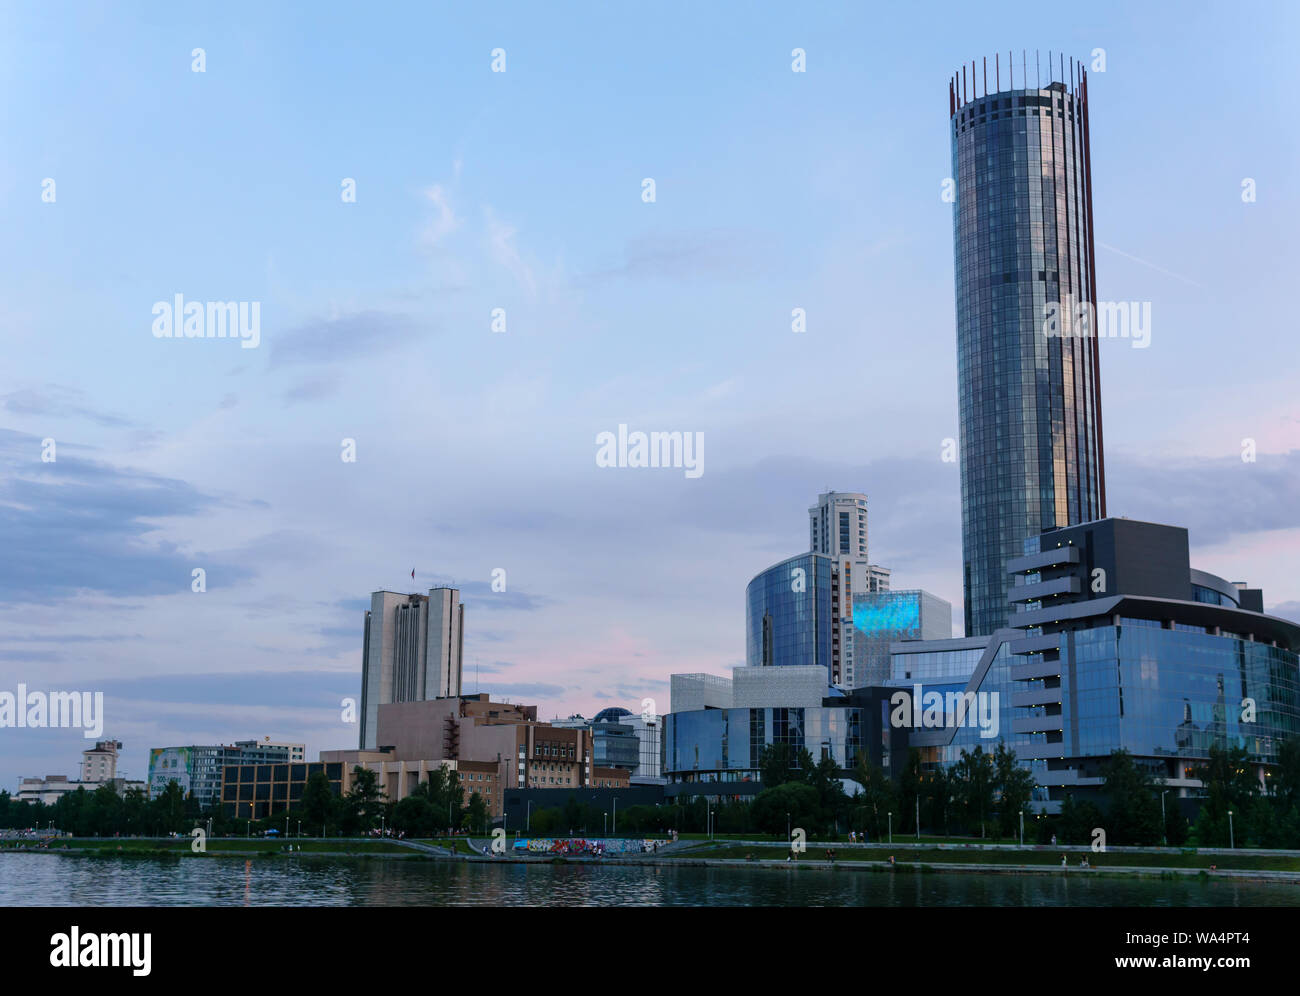 Yekaterinburg, Russia - August 11, 2019: evening view of the residential skyscraper Iset Tower Stock Photo